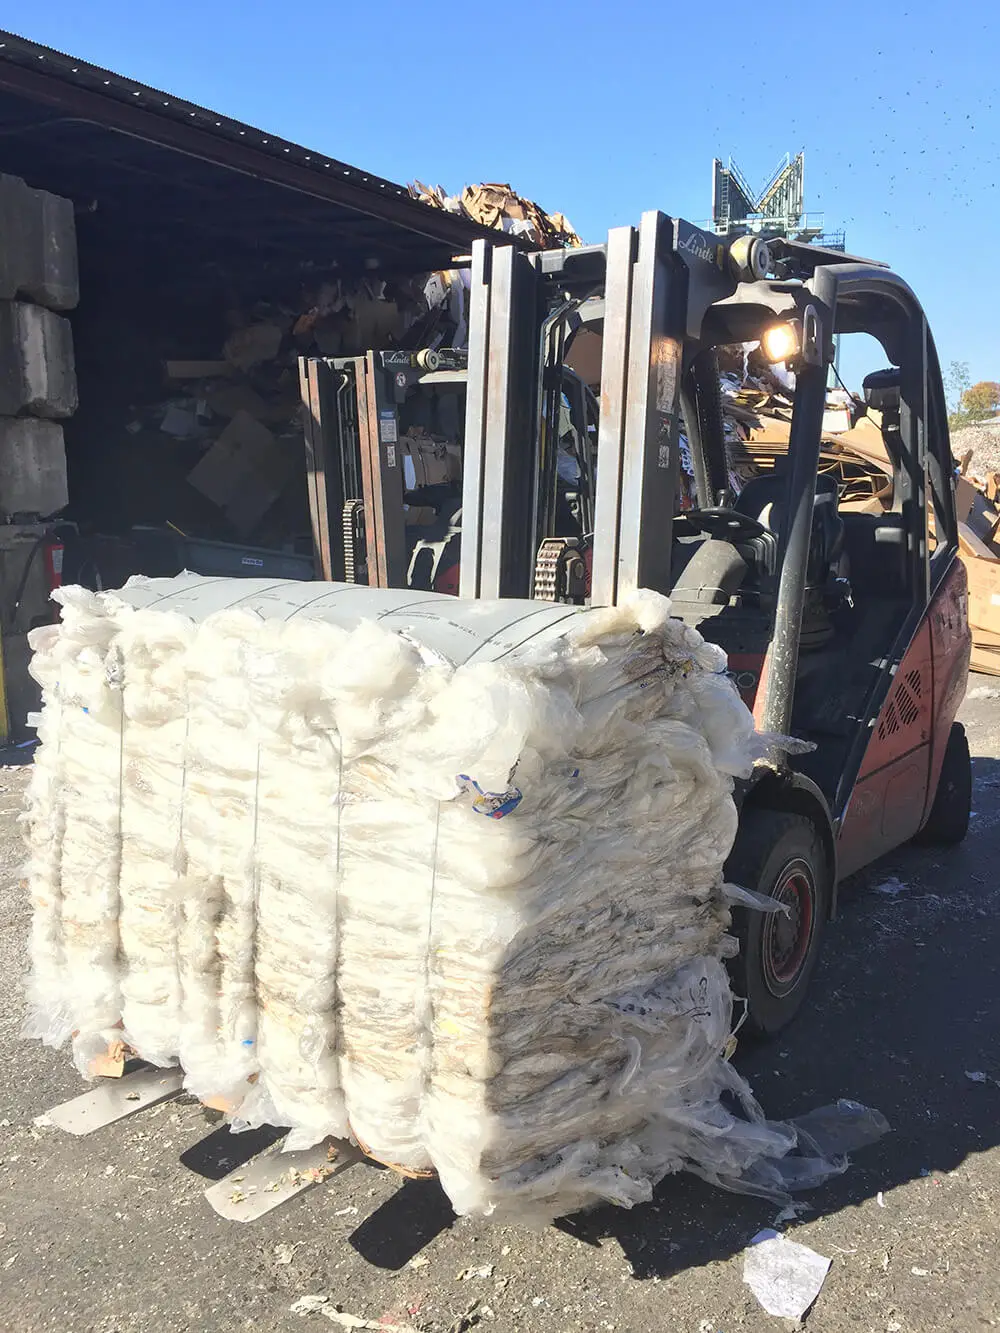 Forklift carrying a pile of recycled plastic